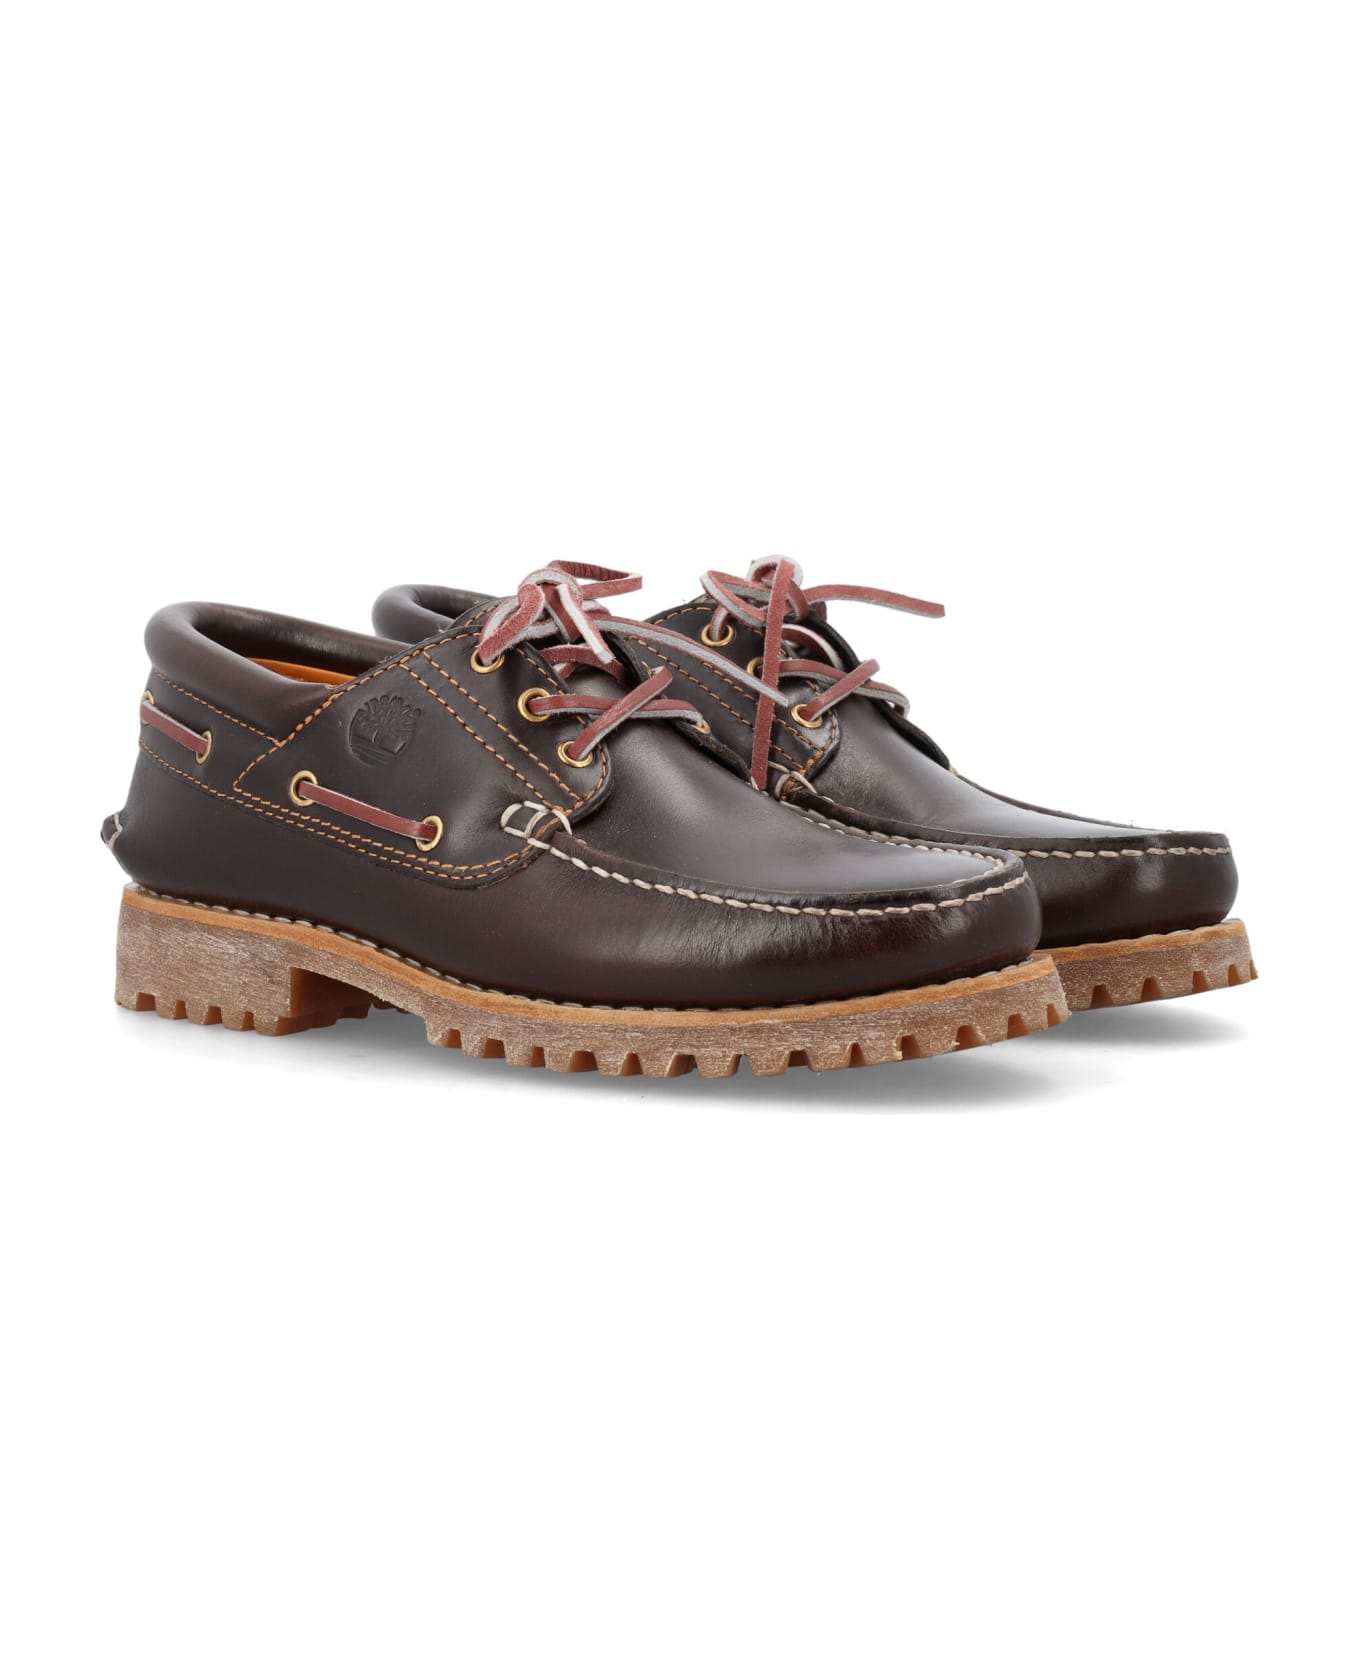 Timberland Classic Hand-sewn Boat Shoe - BROWN